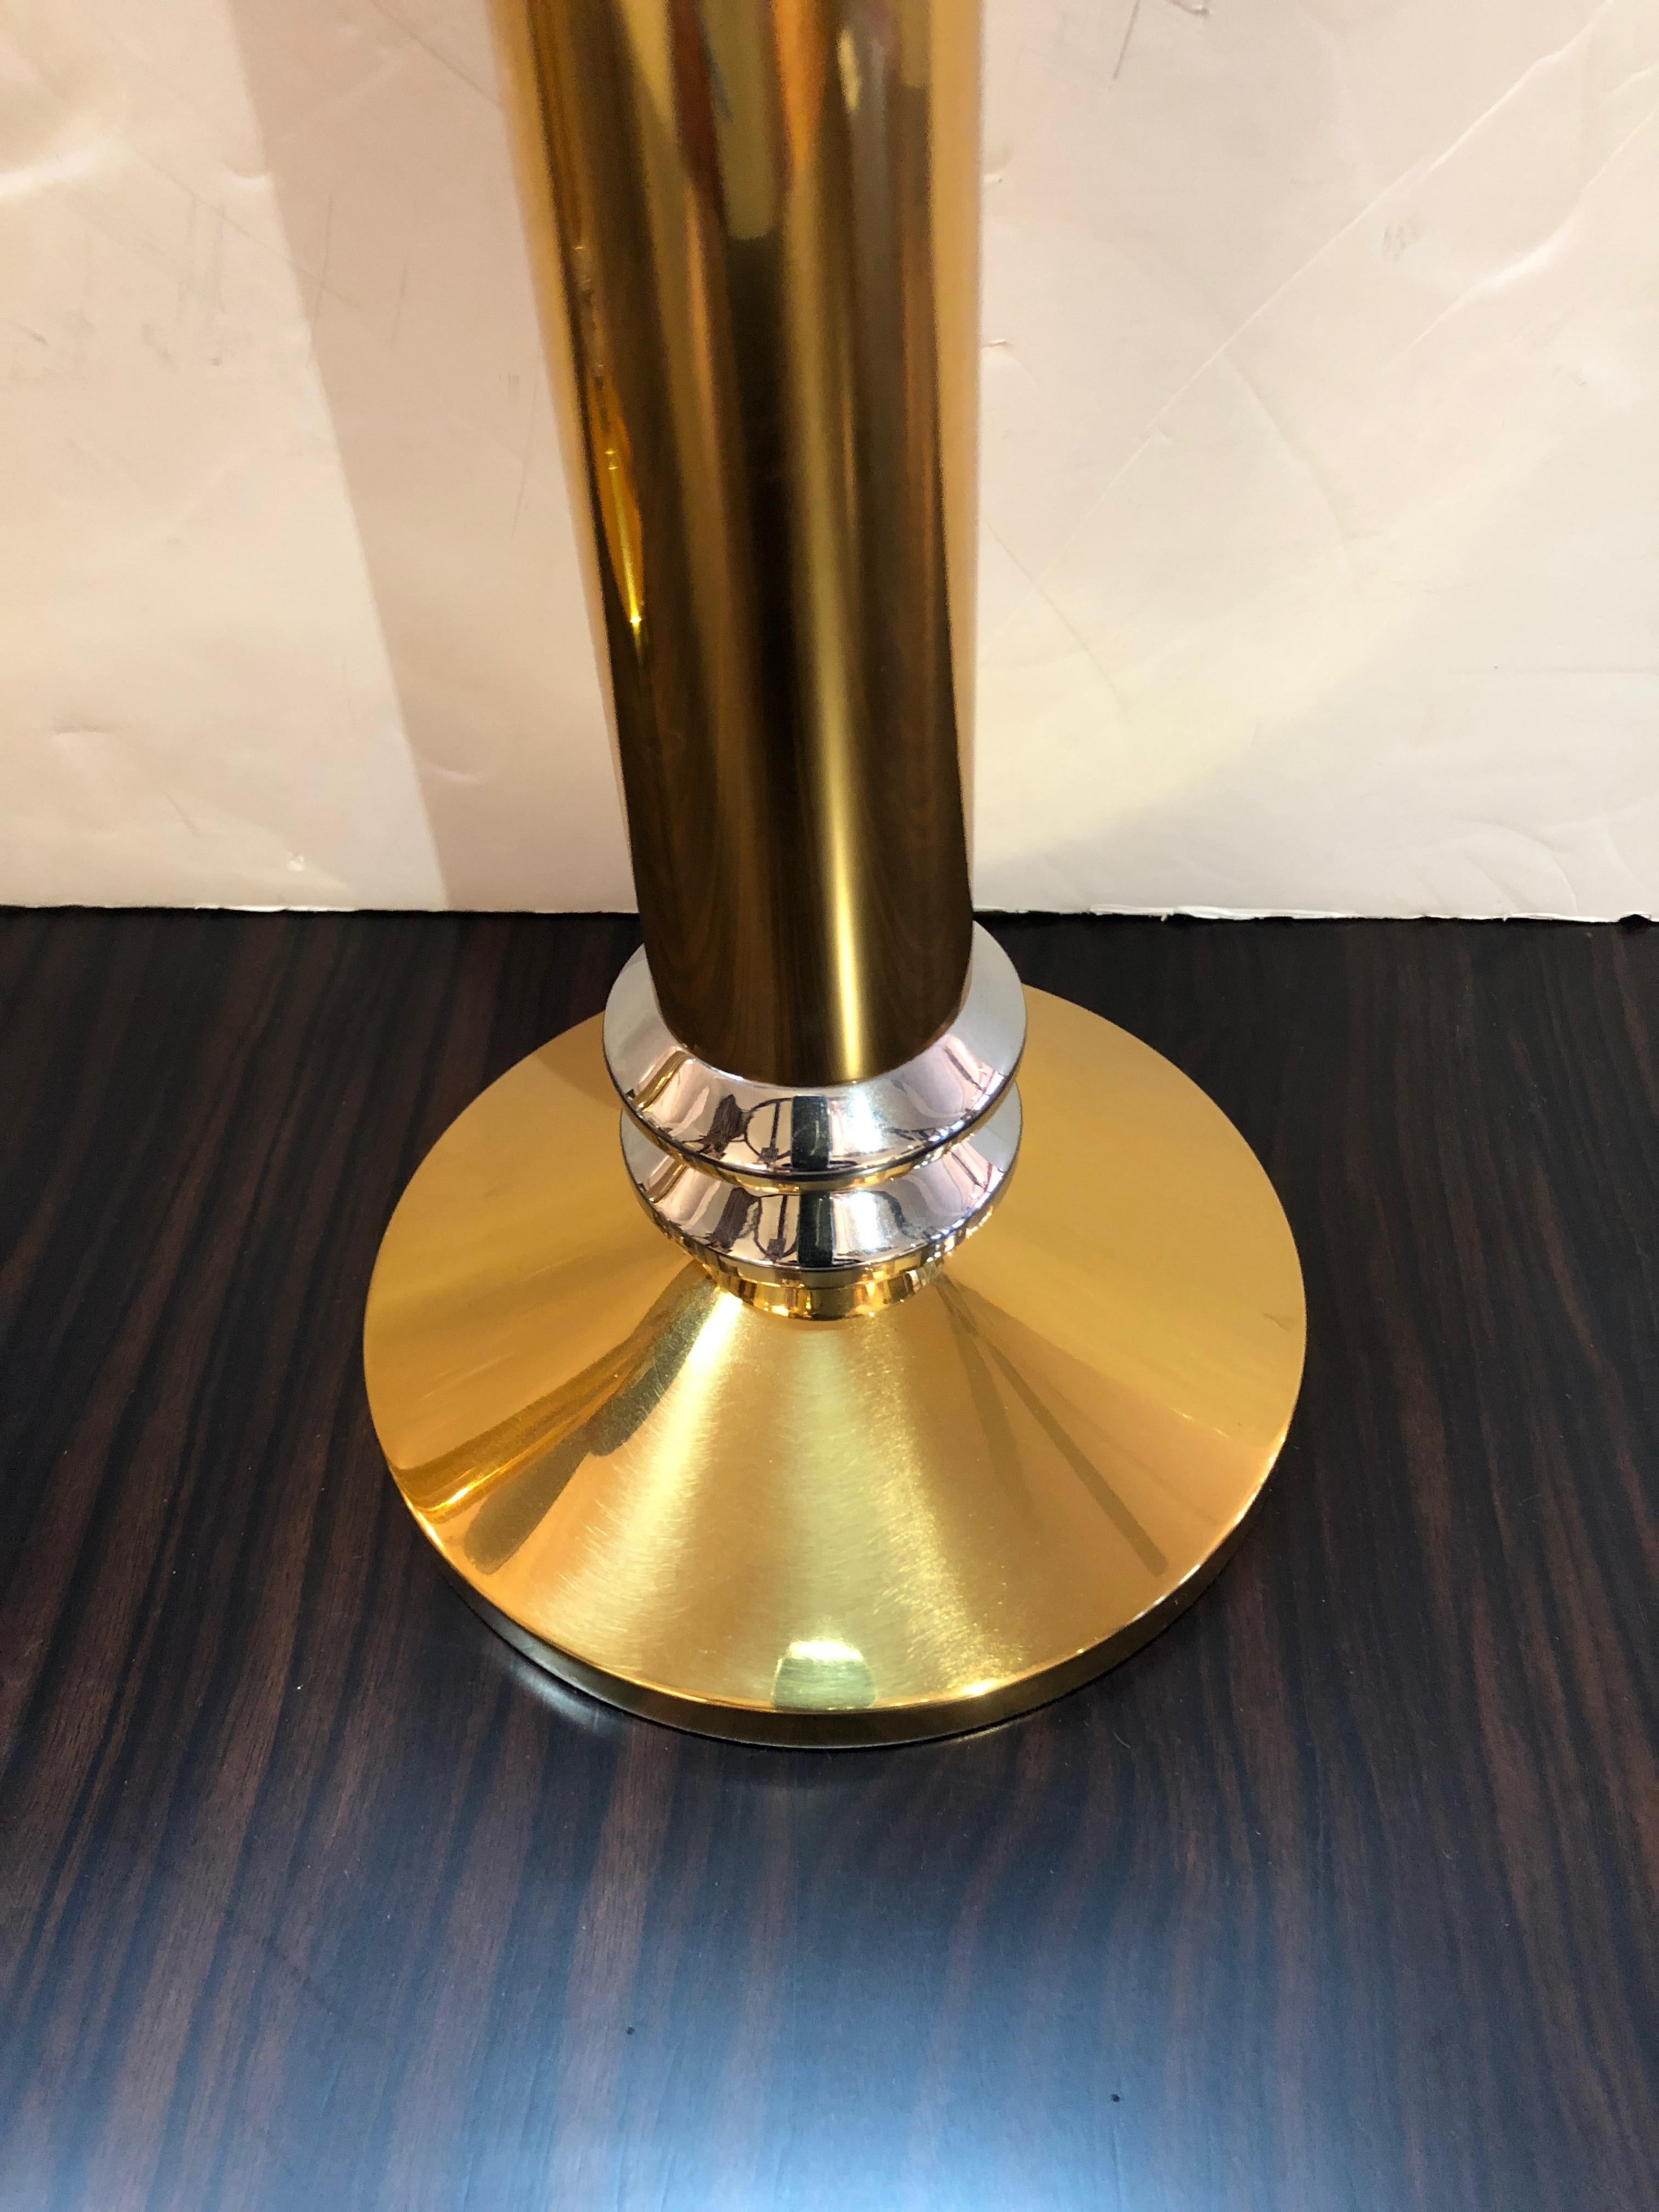 Two impressively large and heavy candlesticks, one slightly taller than the other, having a stunning mix of metals, primarily brass with chrome details.
Smaller measures 15 inches
Taller is 18